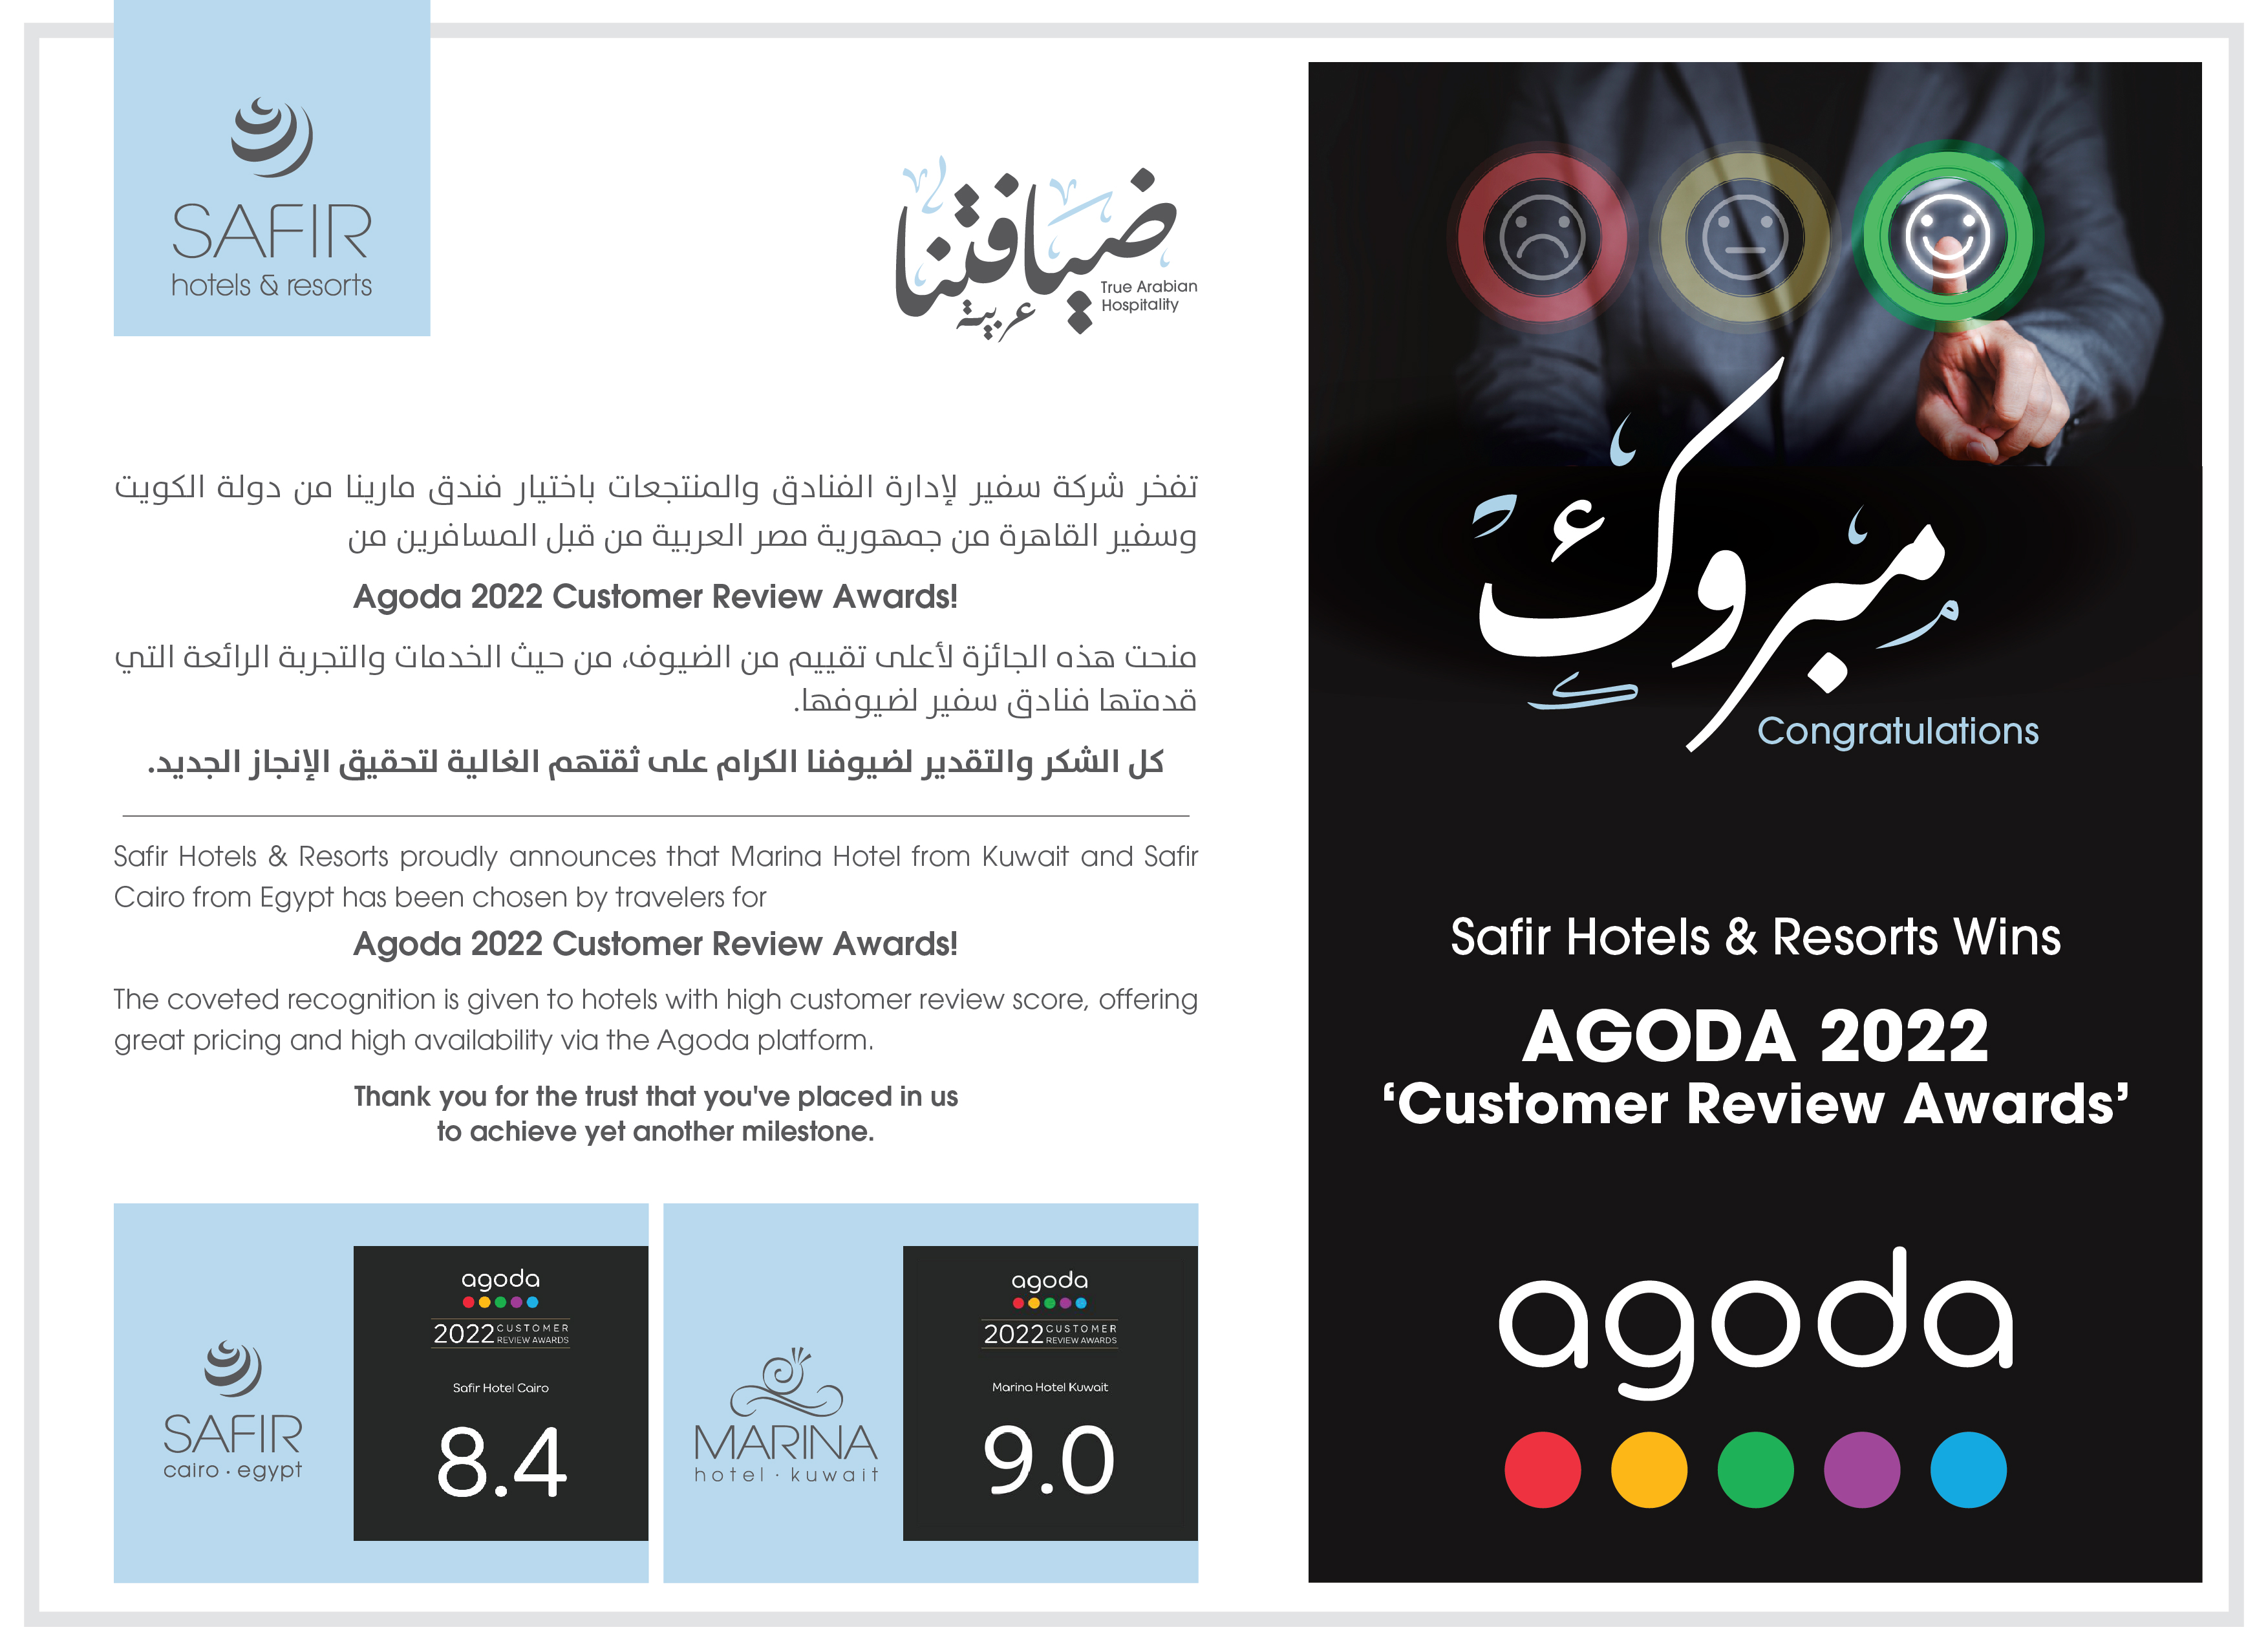 Agoda 2022 Customer Review Awards for our Hotels